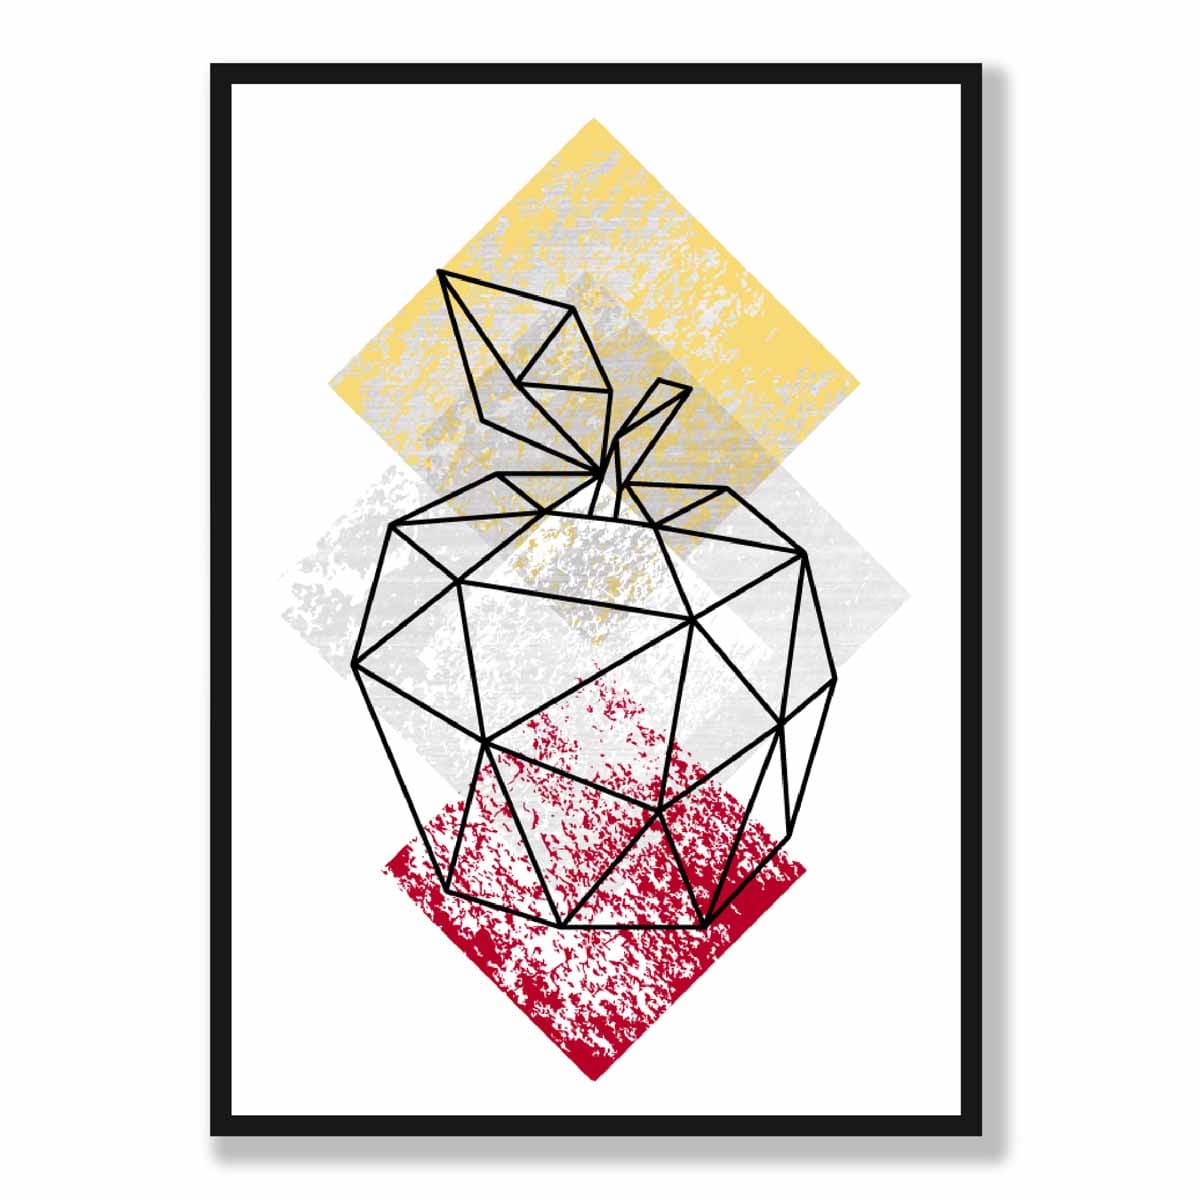 Geometric Fruit Line art Poster of Apple Textured Yellow Grey Red